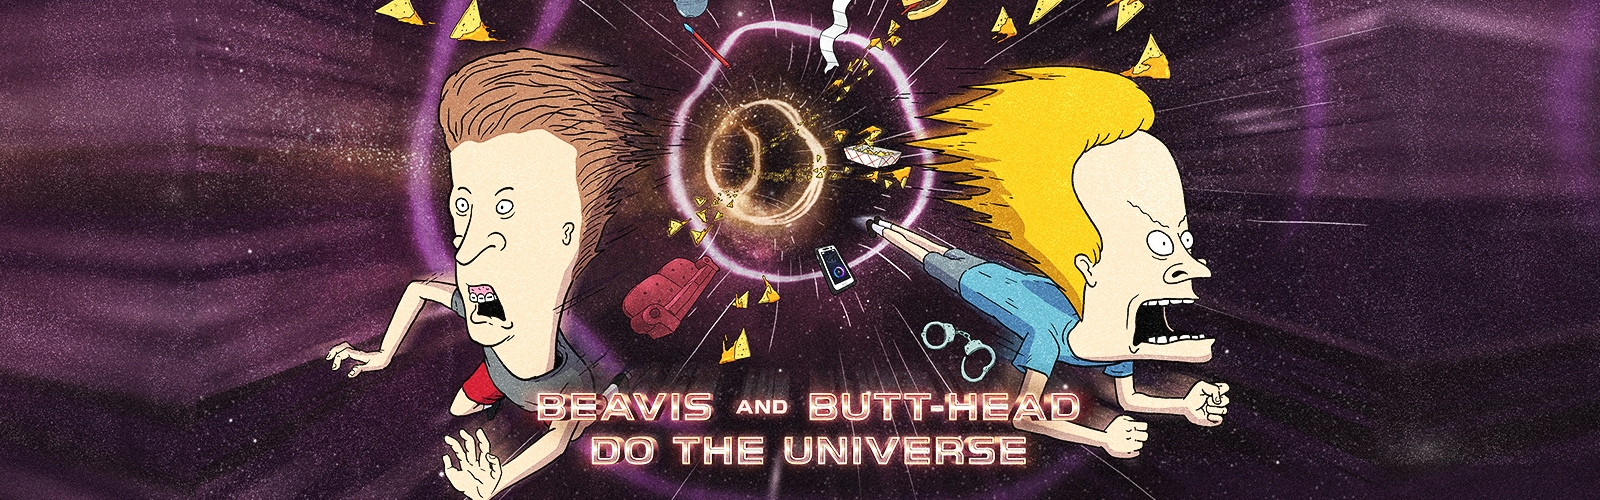 Beavis and Butthead Do The Universe